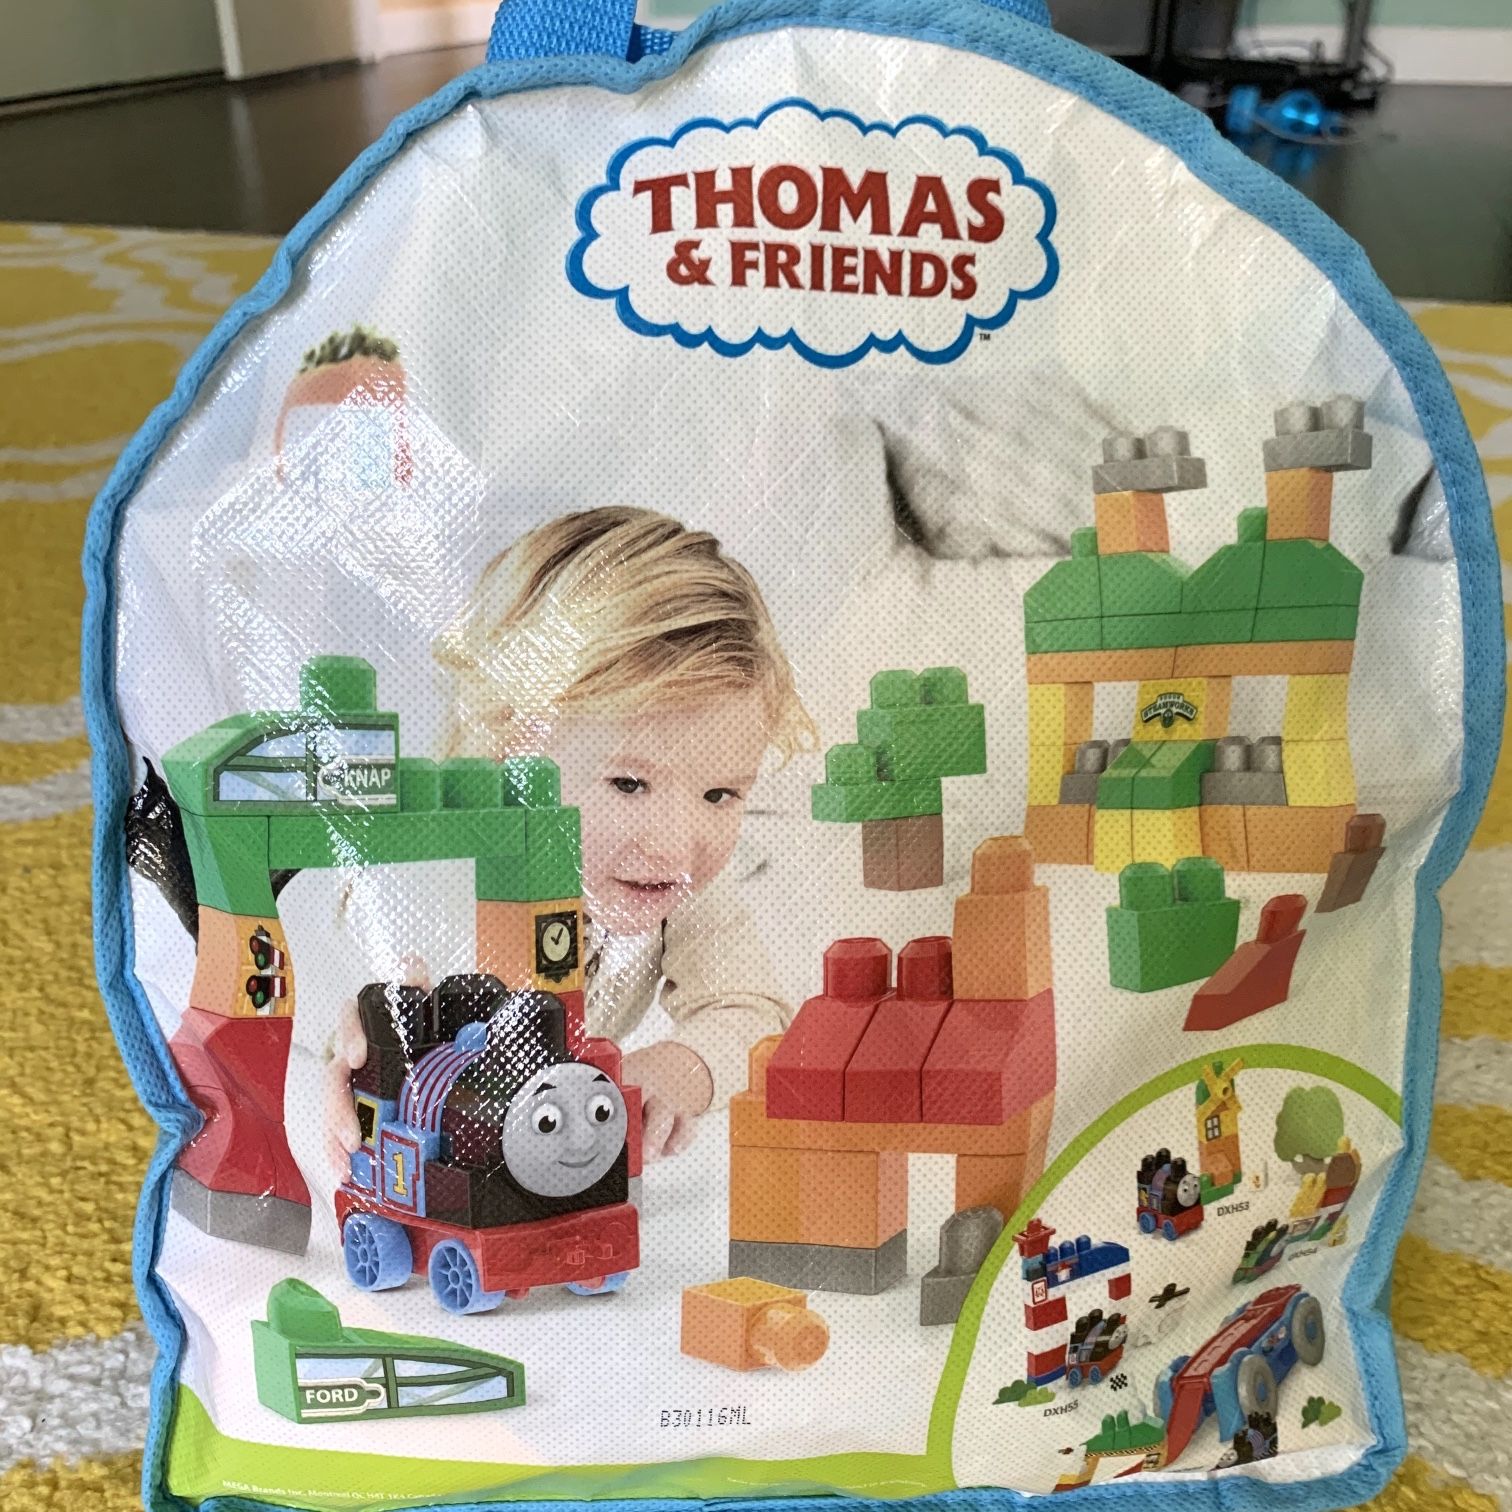 Thomas And Friends Backpack With Lego